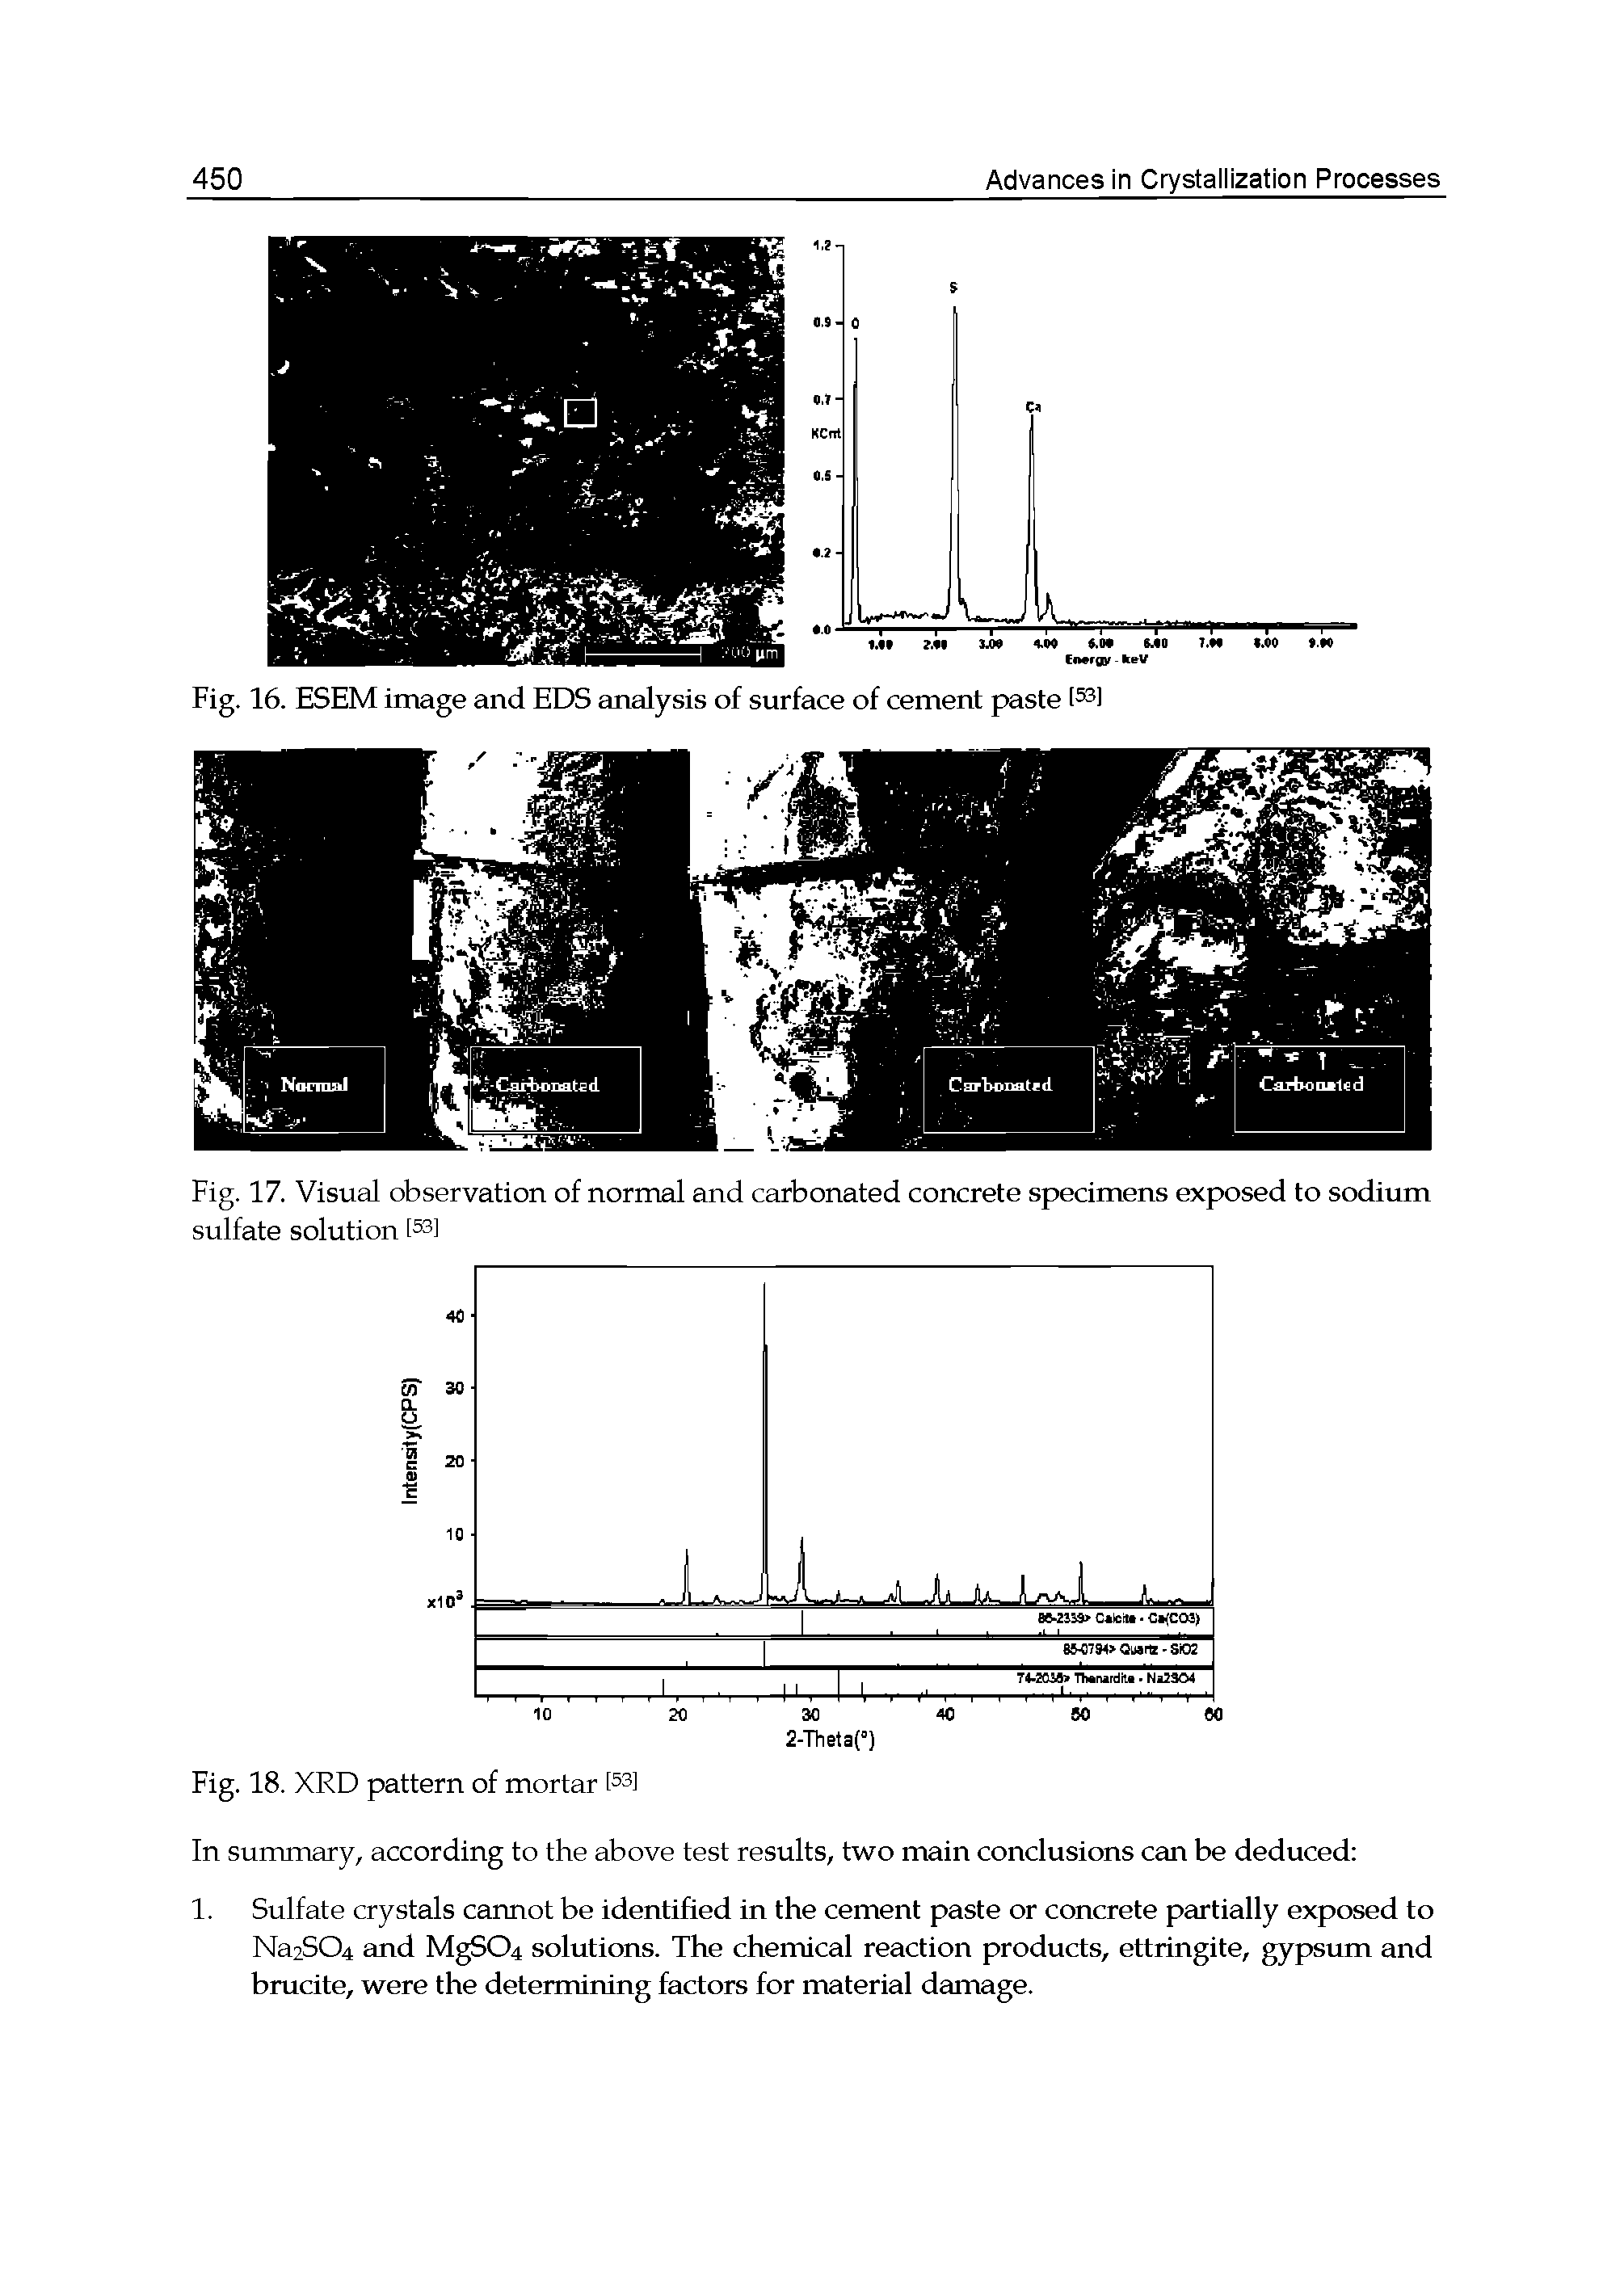 Fig. 16. ESEM image and EDS analysis of surface of cement paste...